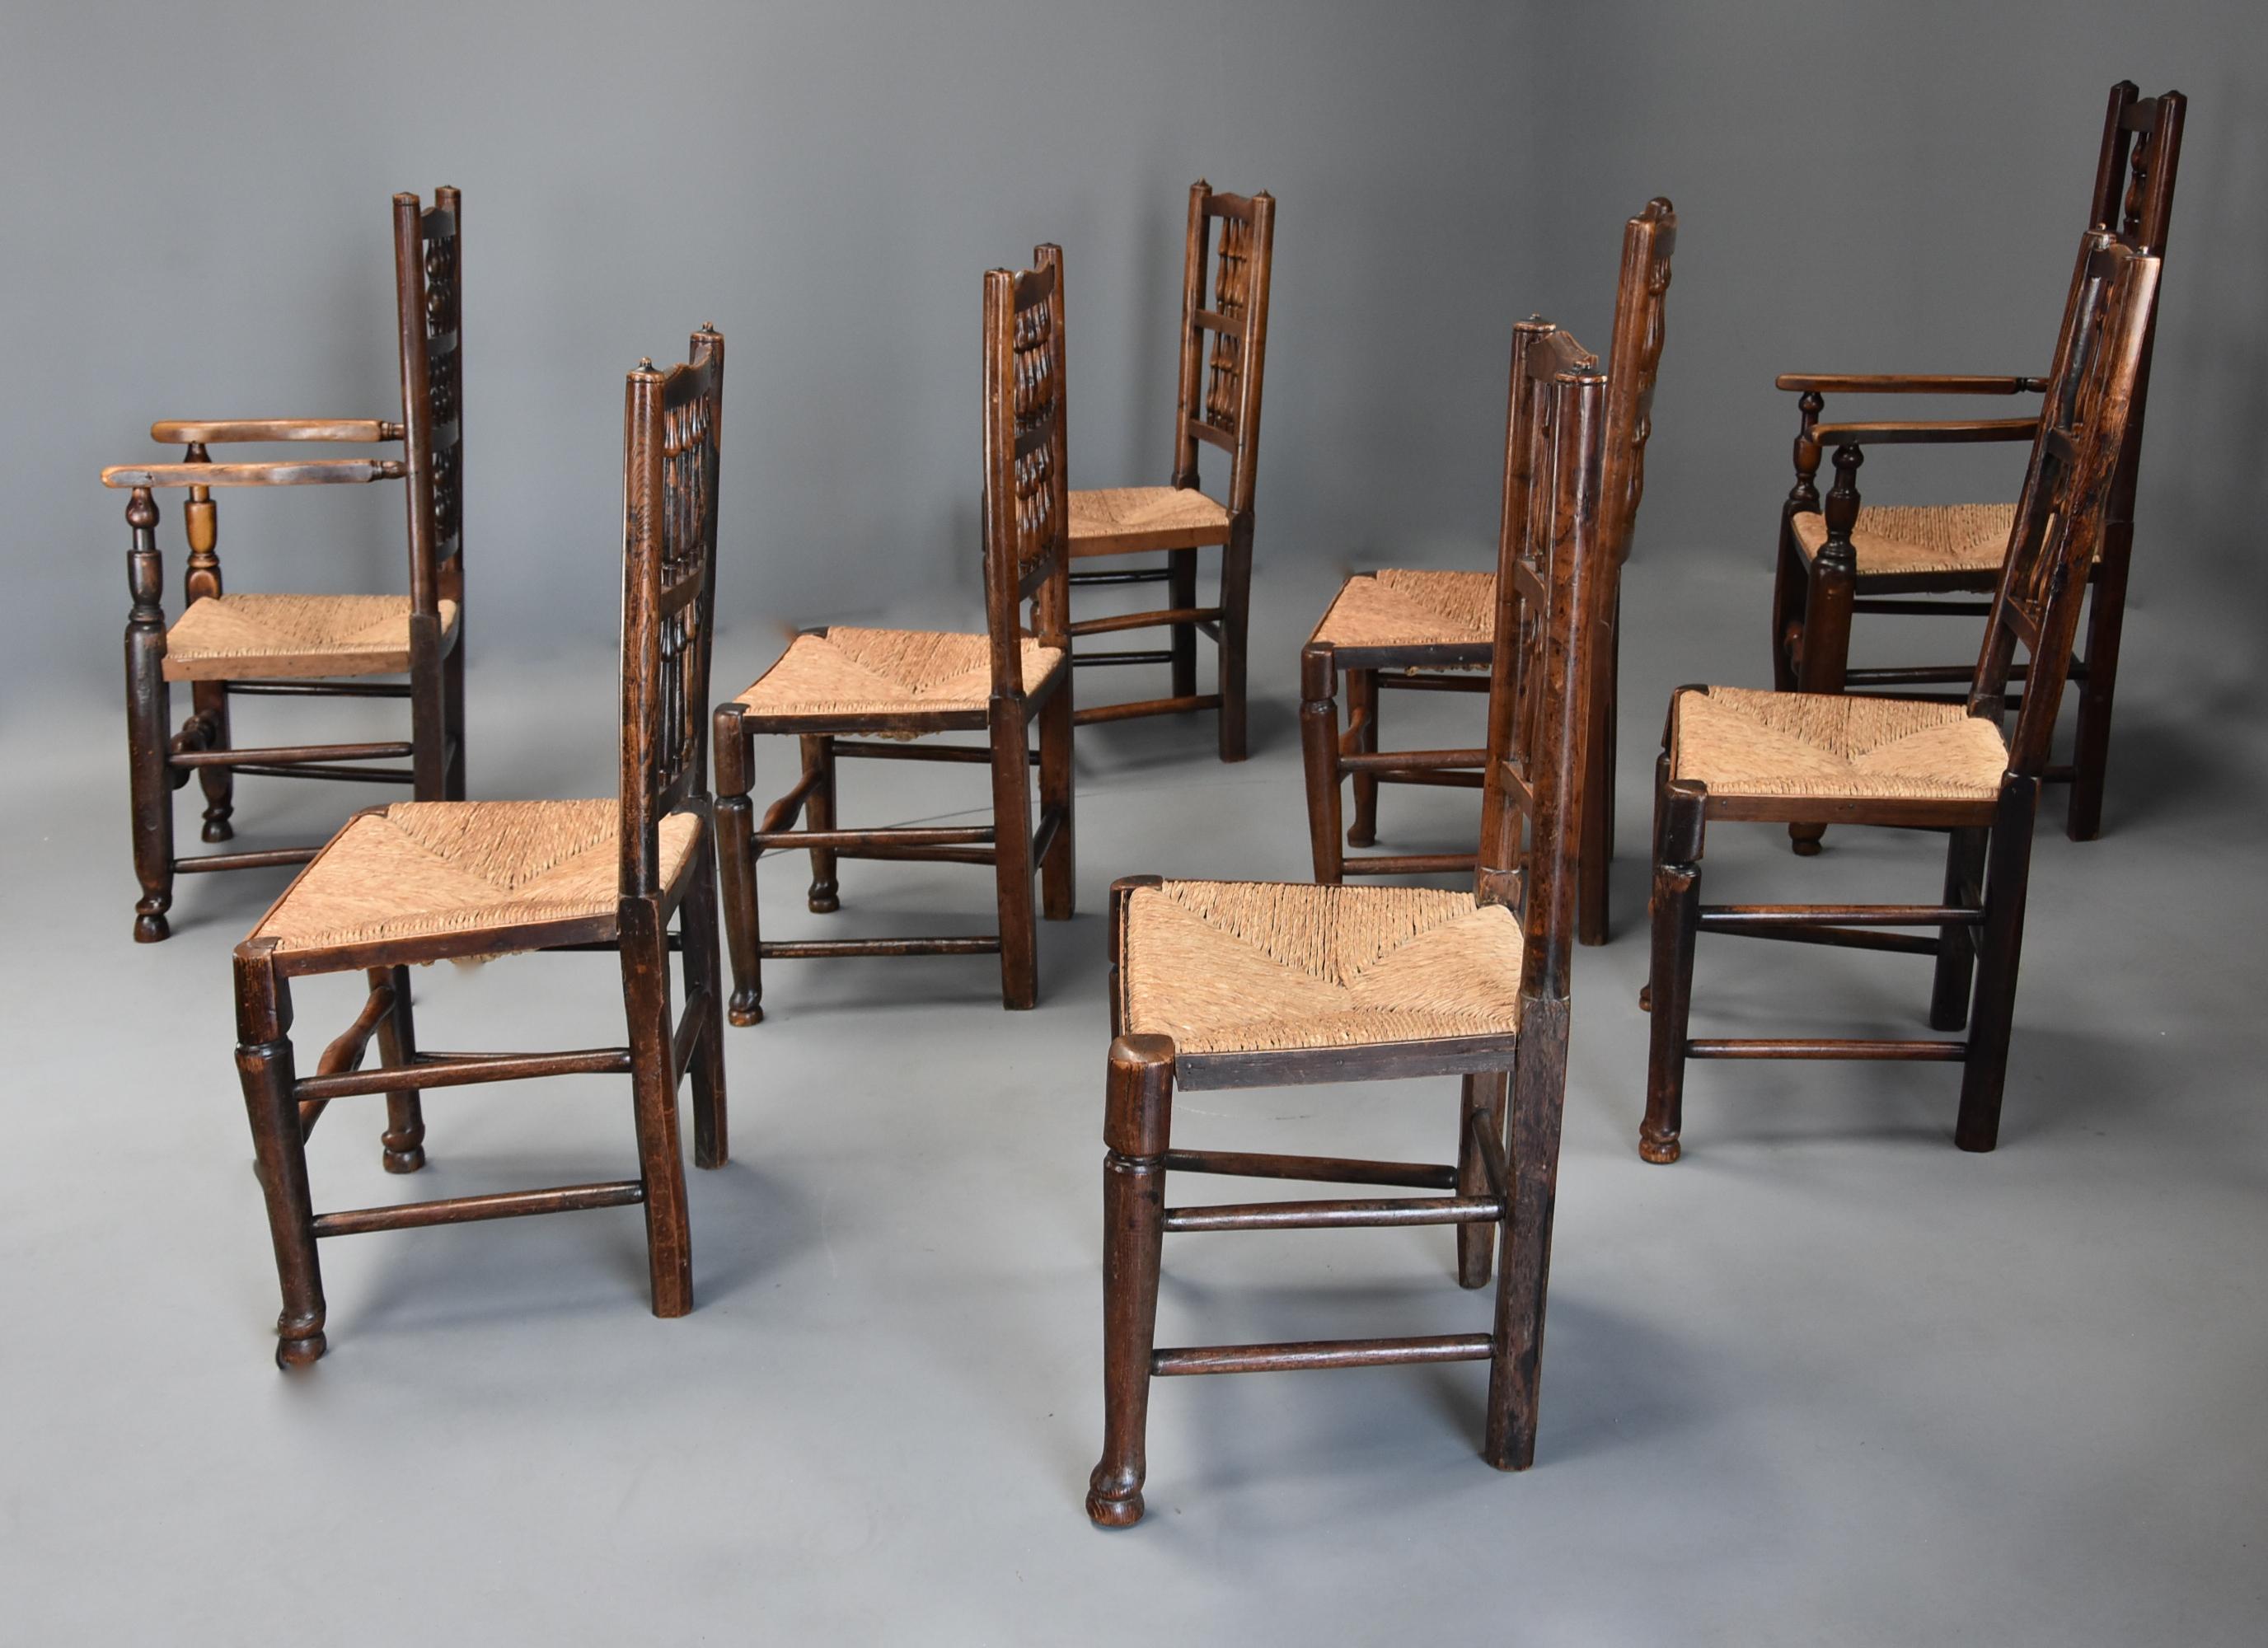 Matched Set of Eight Mid-19th Century Ash Spindle Back Chairs of Superb Patina For Sale 6